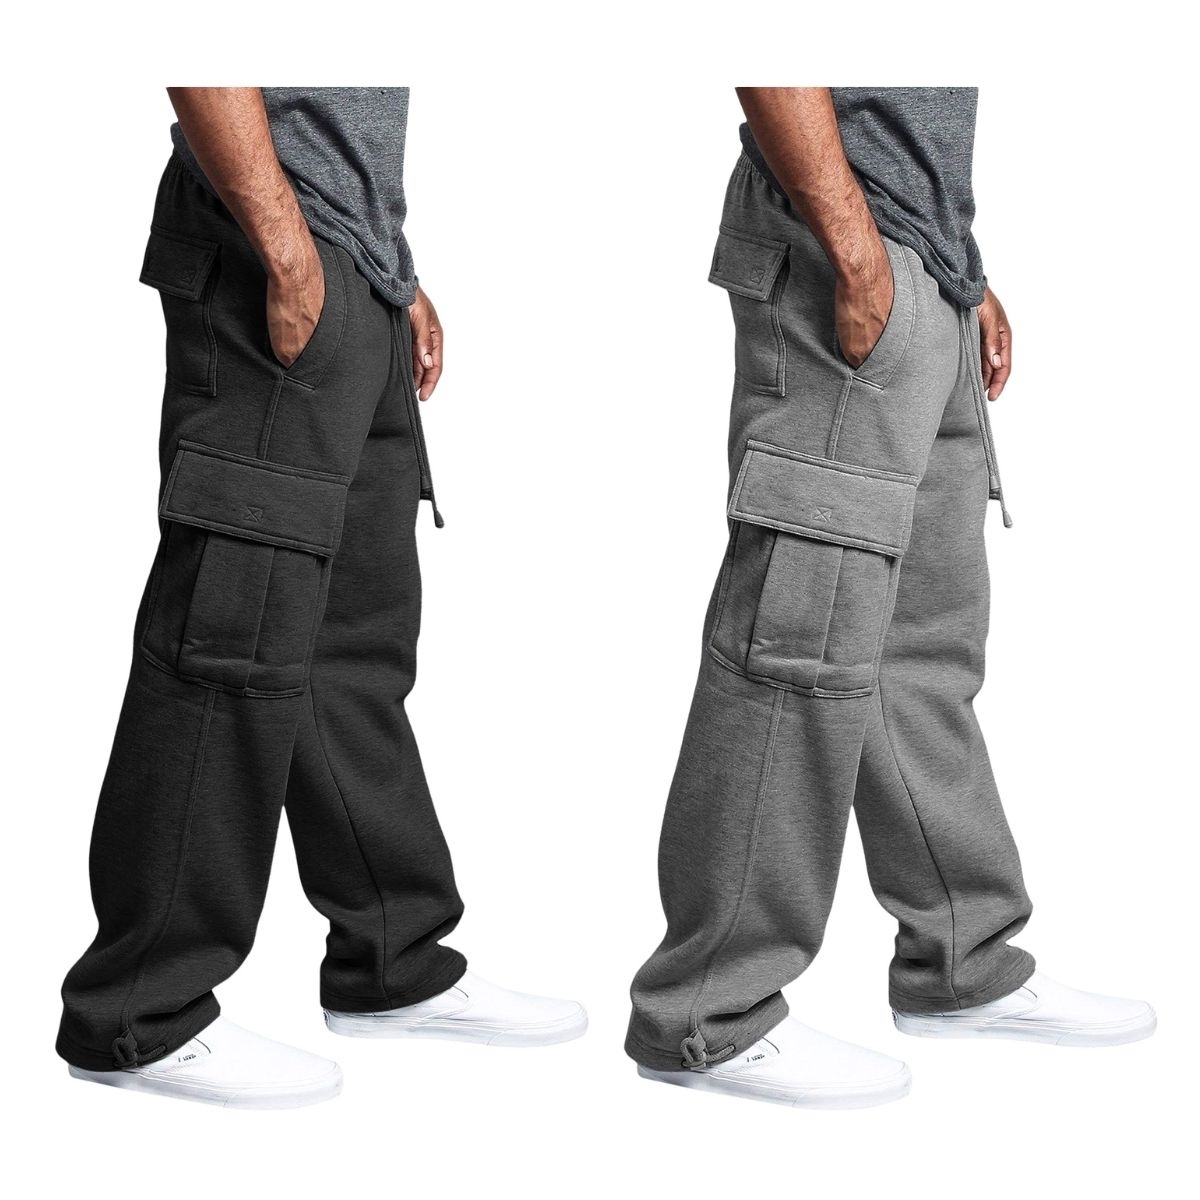 2-Pack: Men's Casual Solid Fleece Lined Cargo Jogger Soft Sweatpants With Pockets - Black&charcoal, Small